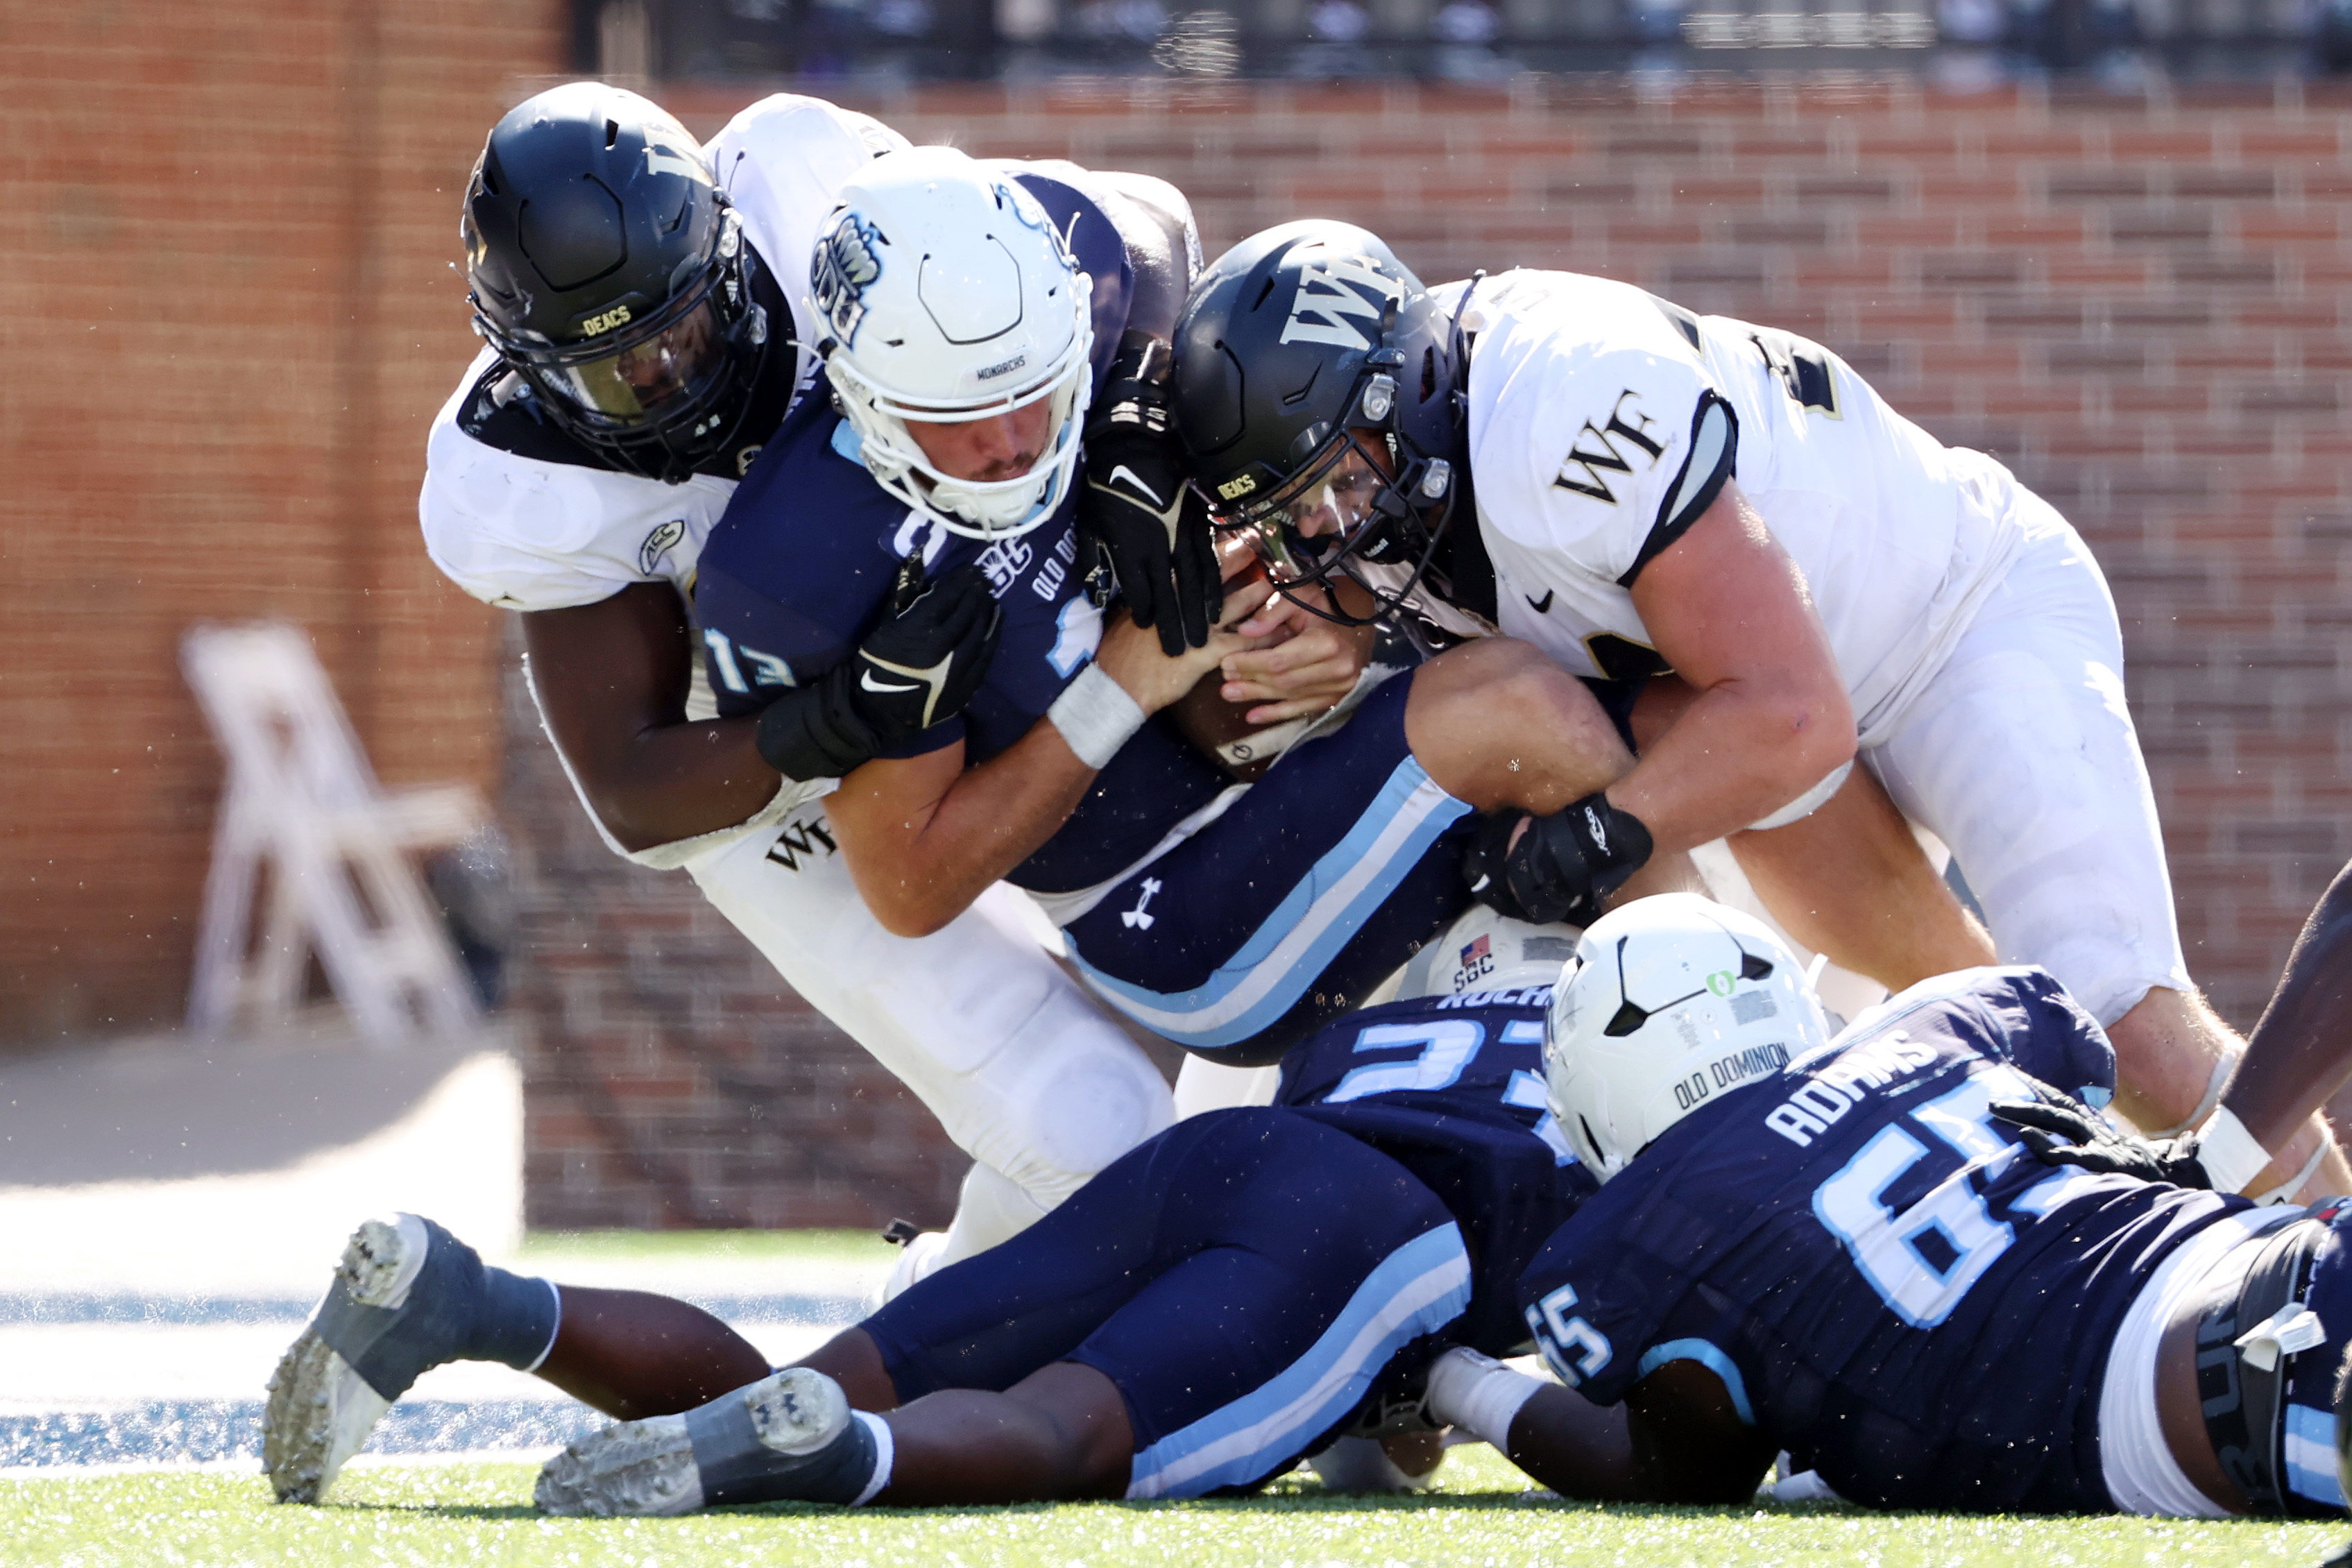 Weekly mid major report for James Madison with predictions for Week 9 Grant Wilson ODU Monarchs